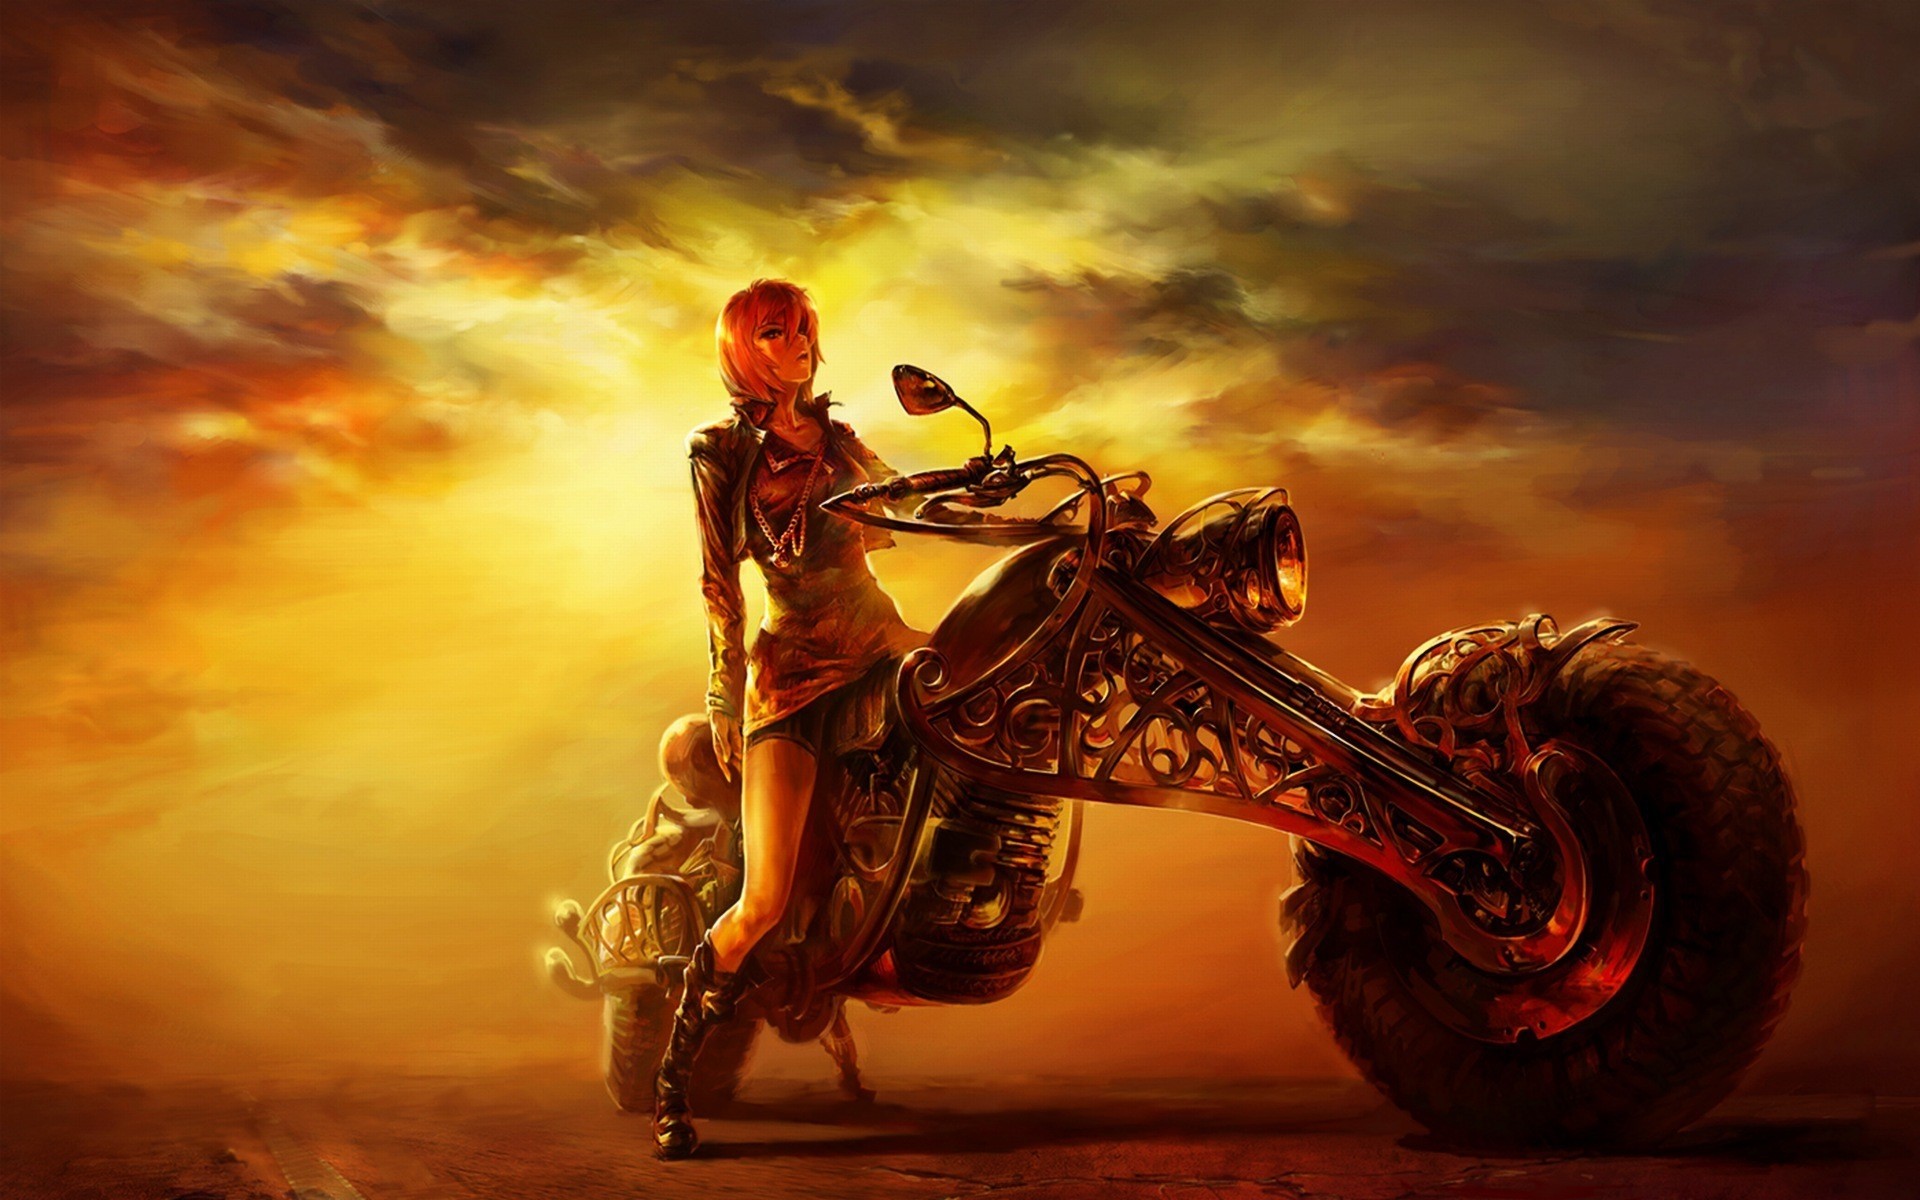 1920x1200 Fantasy girl, bike, 3D, Photomanipulation, Photoshop Full HD wallpaper  download to PC, Mobile or Table PC. You can also set as Facebook Cover